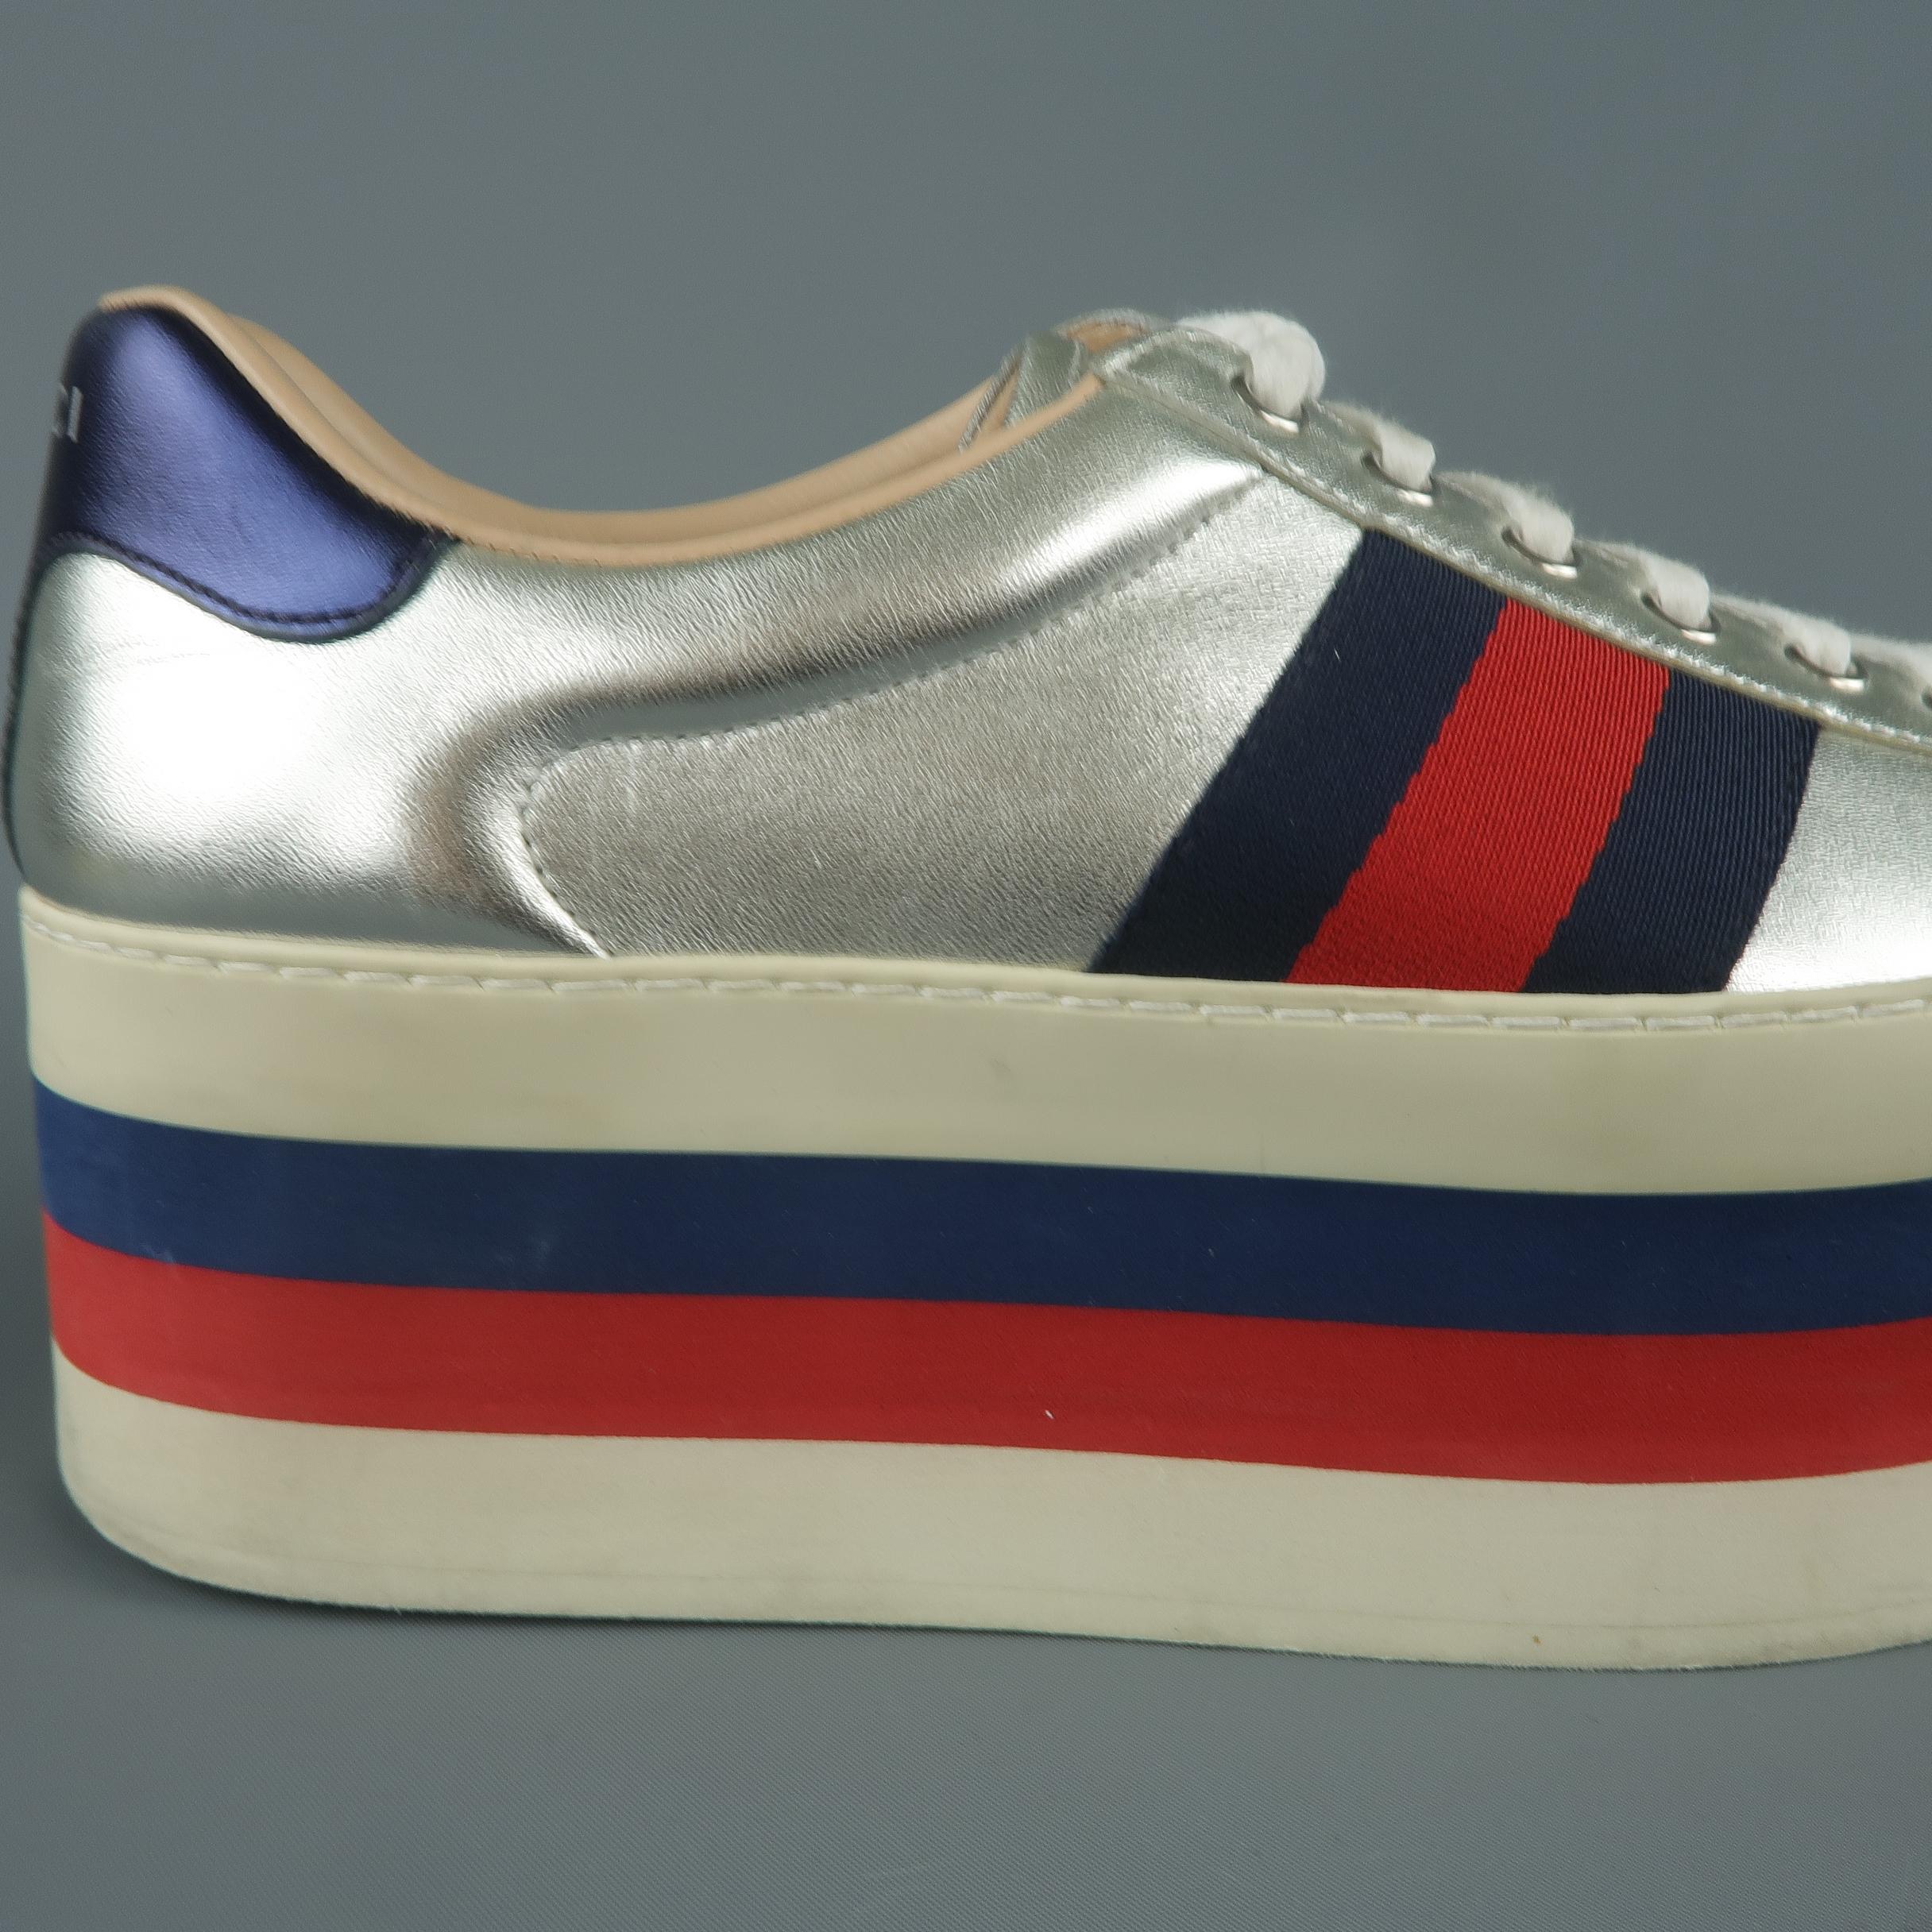 GUCCI platform sneakers come in metallic silver leather with signature grosgrain webbing, metallic red and navy heels, and striped platform sole. Made in Italy.
 
Good Pre-Owned Condition.
Marked: UK 7
 
Platform: 2.5 in.